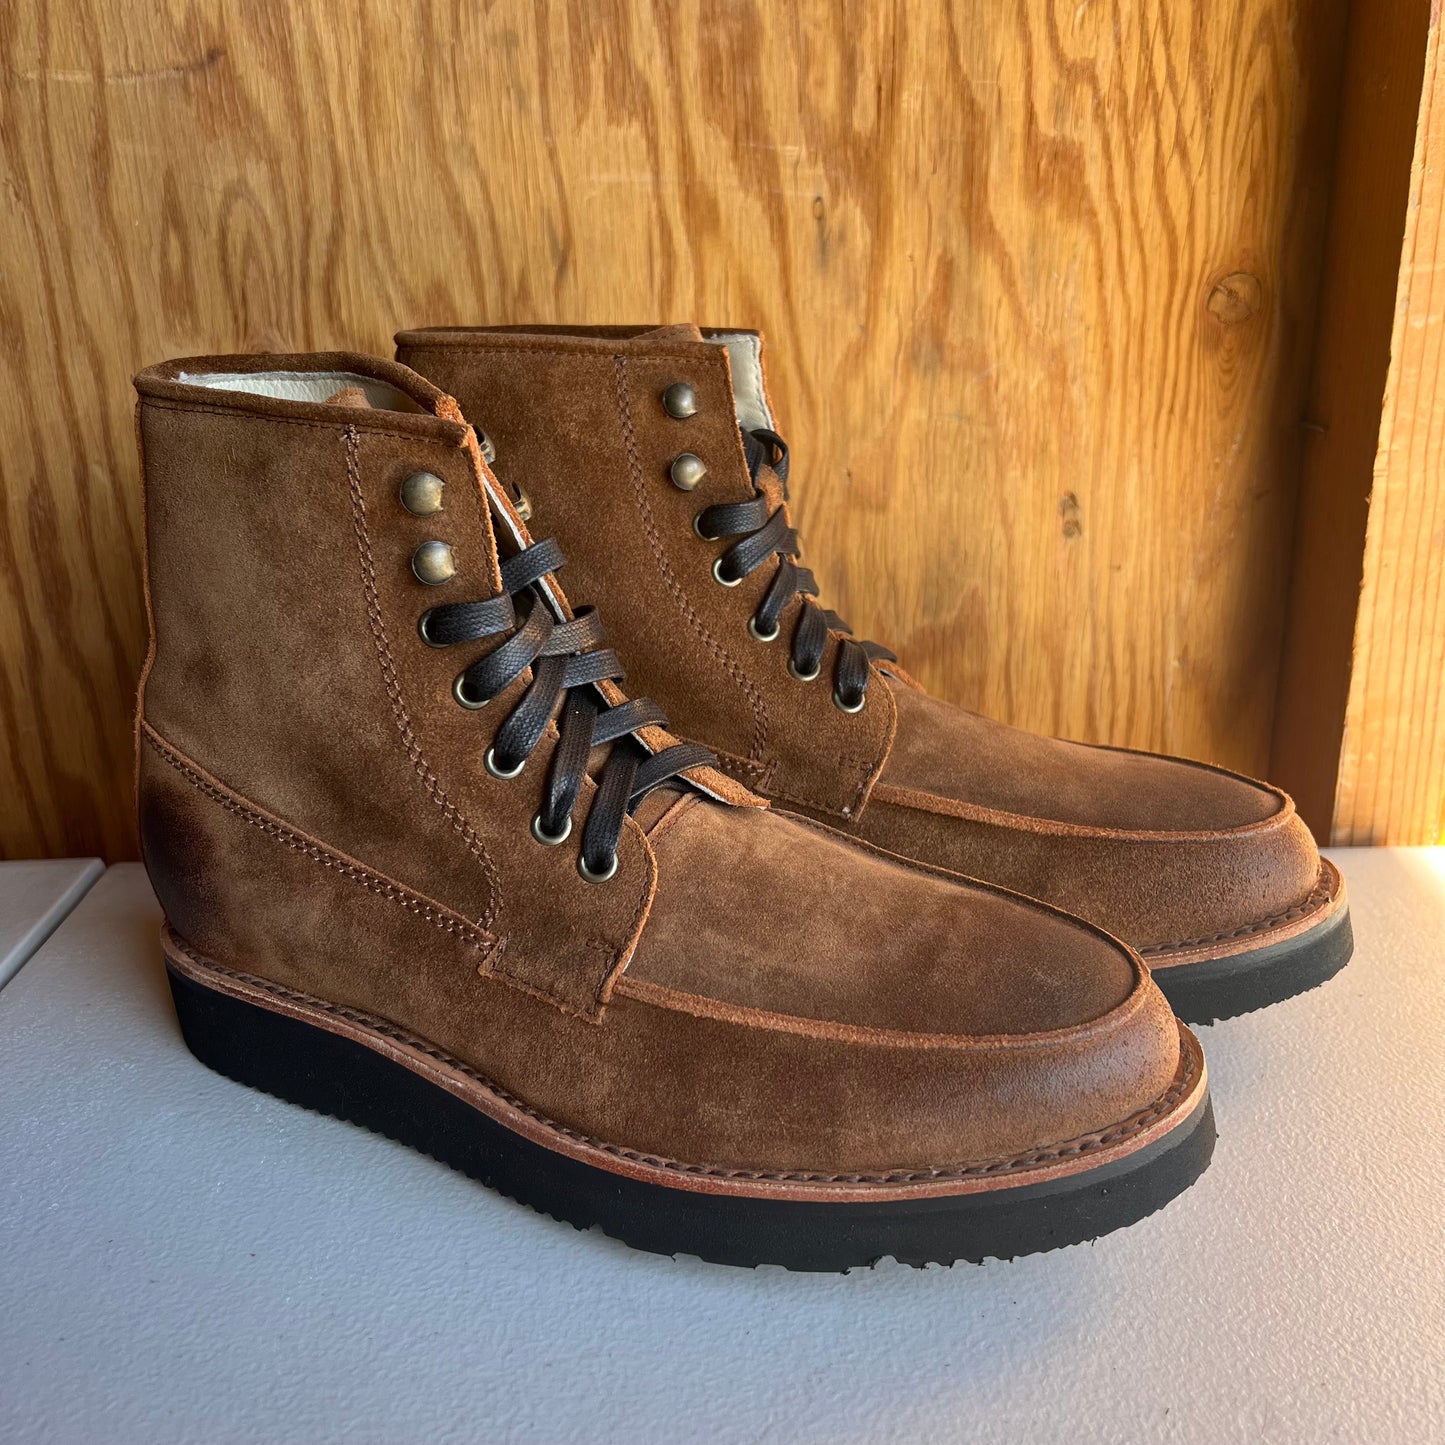 Nomad - Waxed Cognac Suede Size 8.5